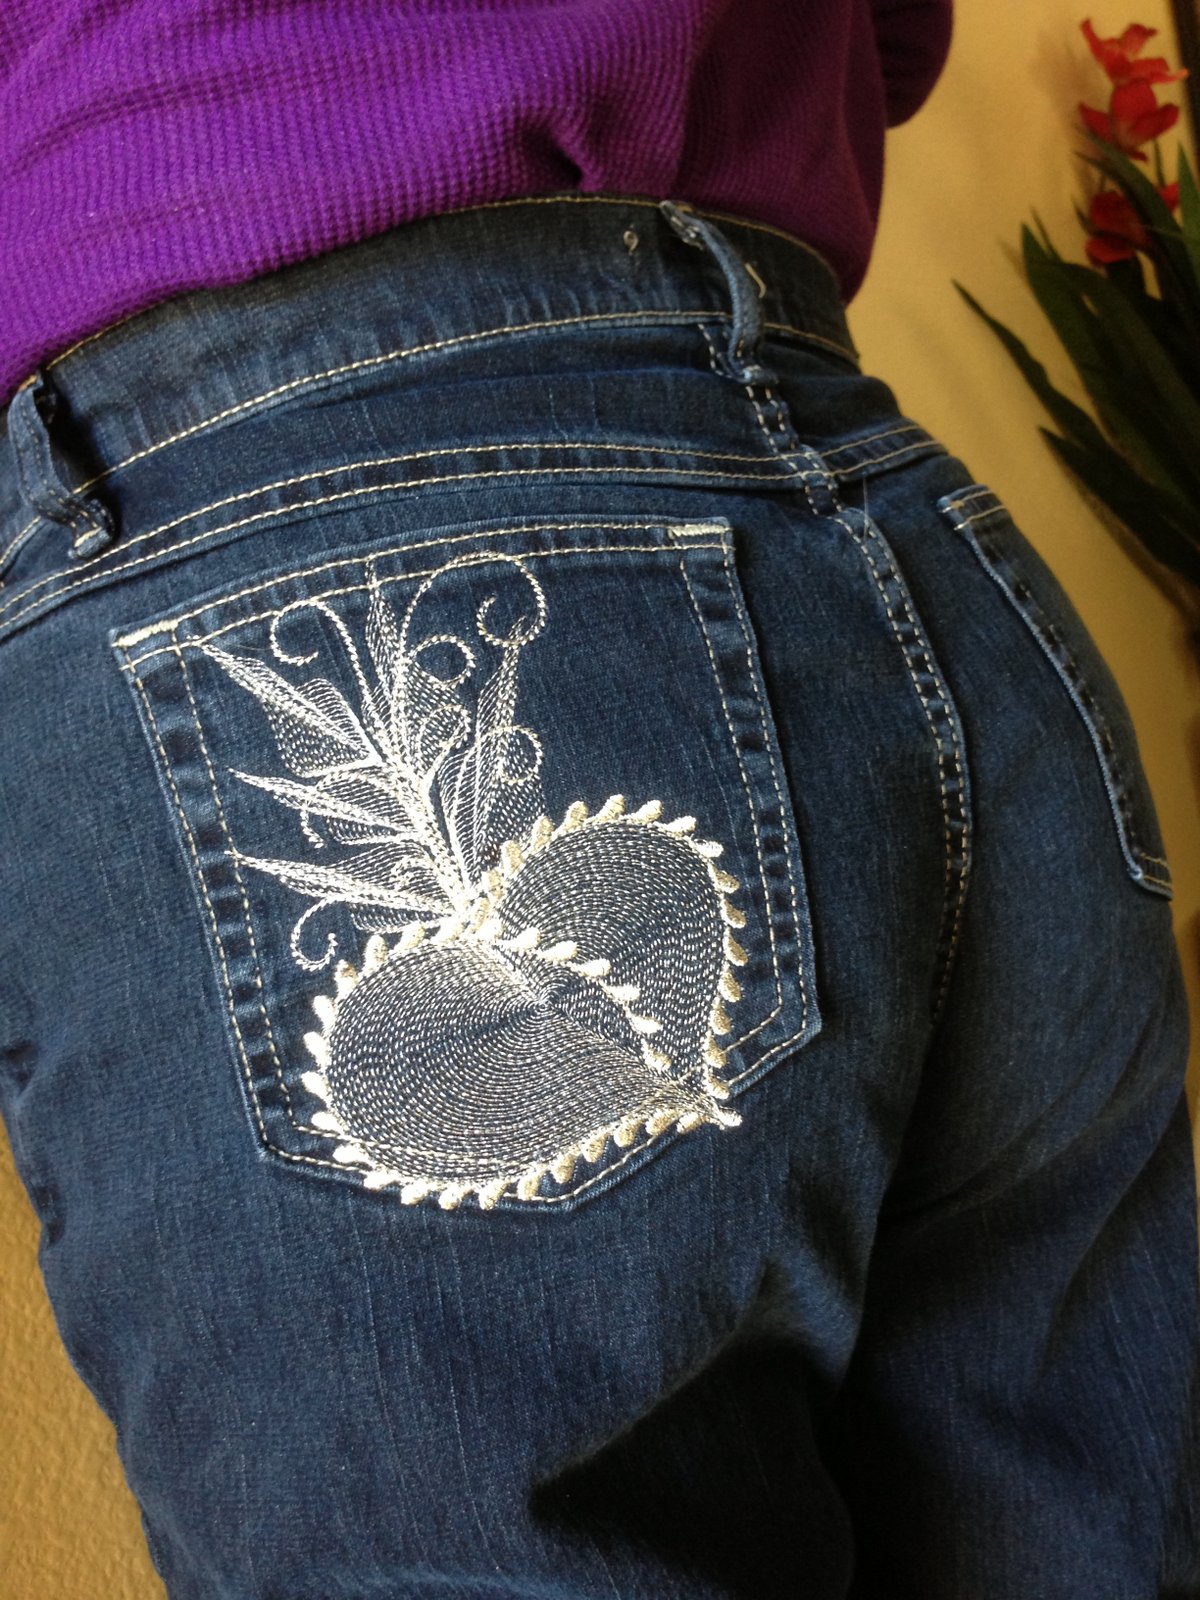 Embroidery Patterns For Jeans | Hand Embroidery